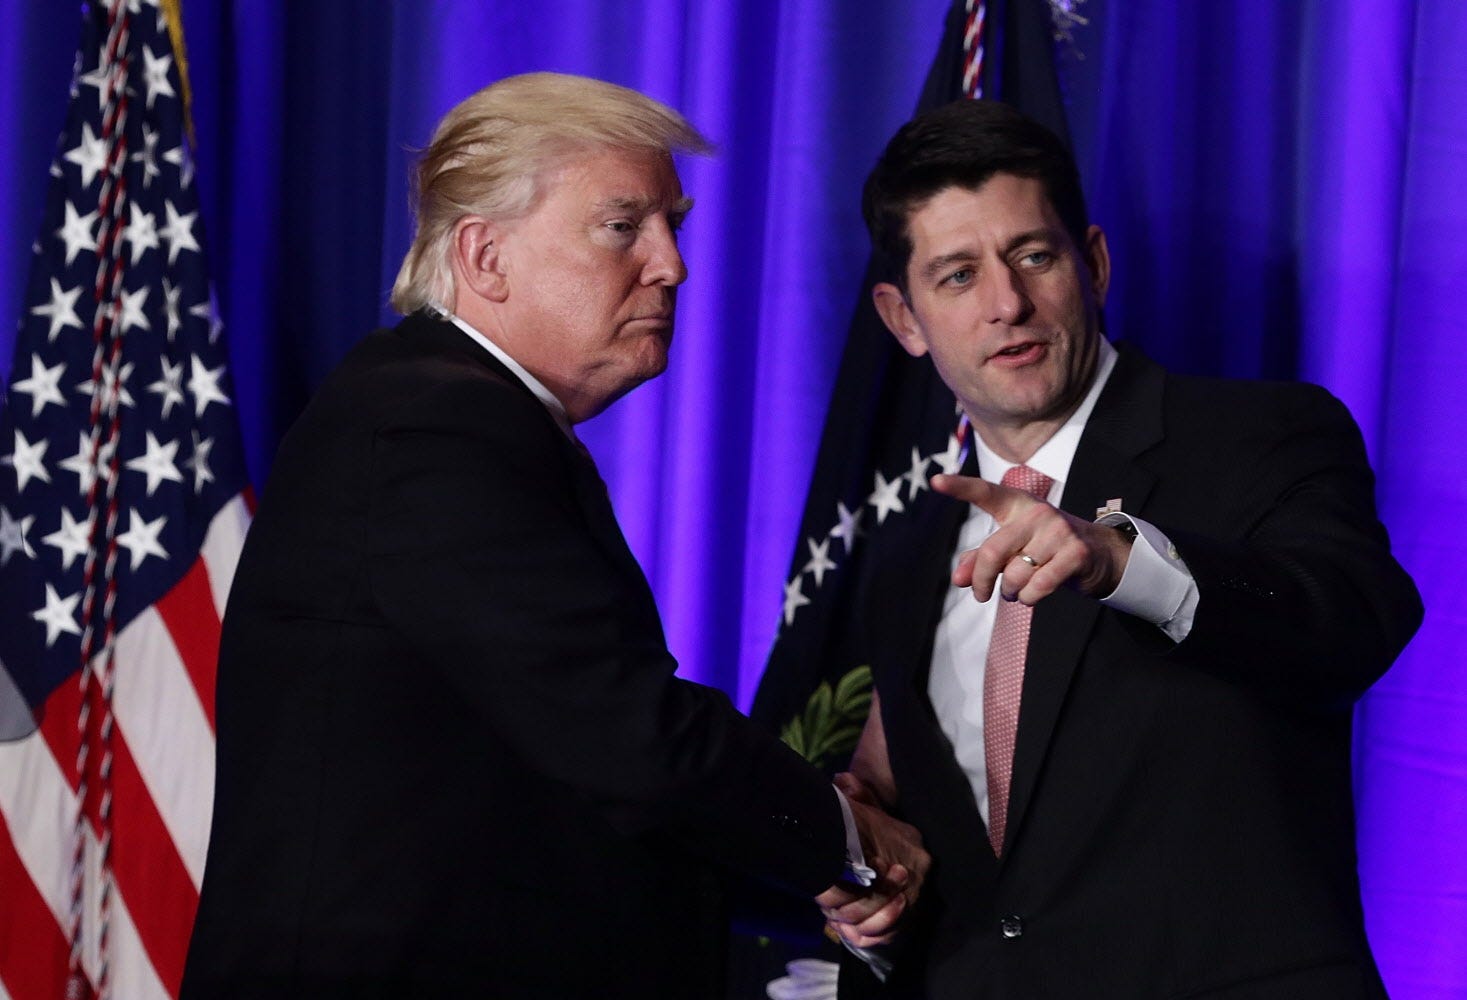 microsoft, paul ryan says he won't vote for donald trump: 'character is too important'